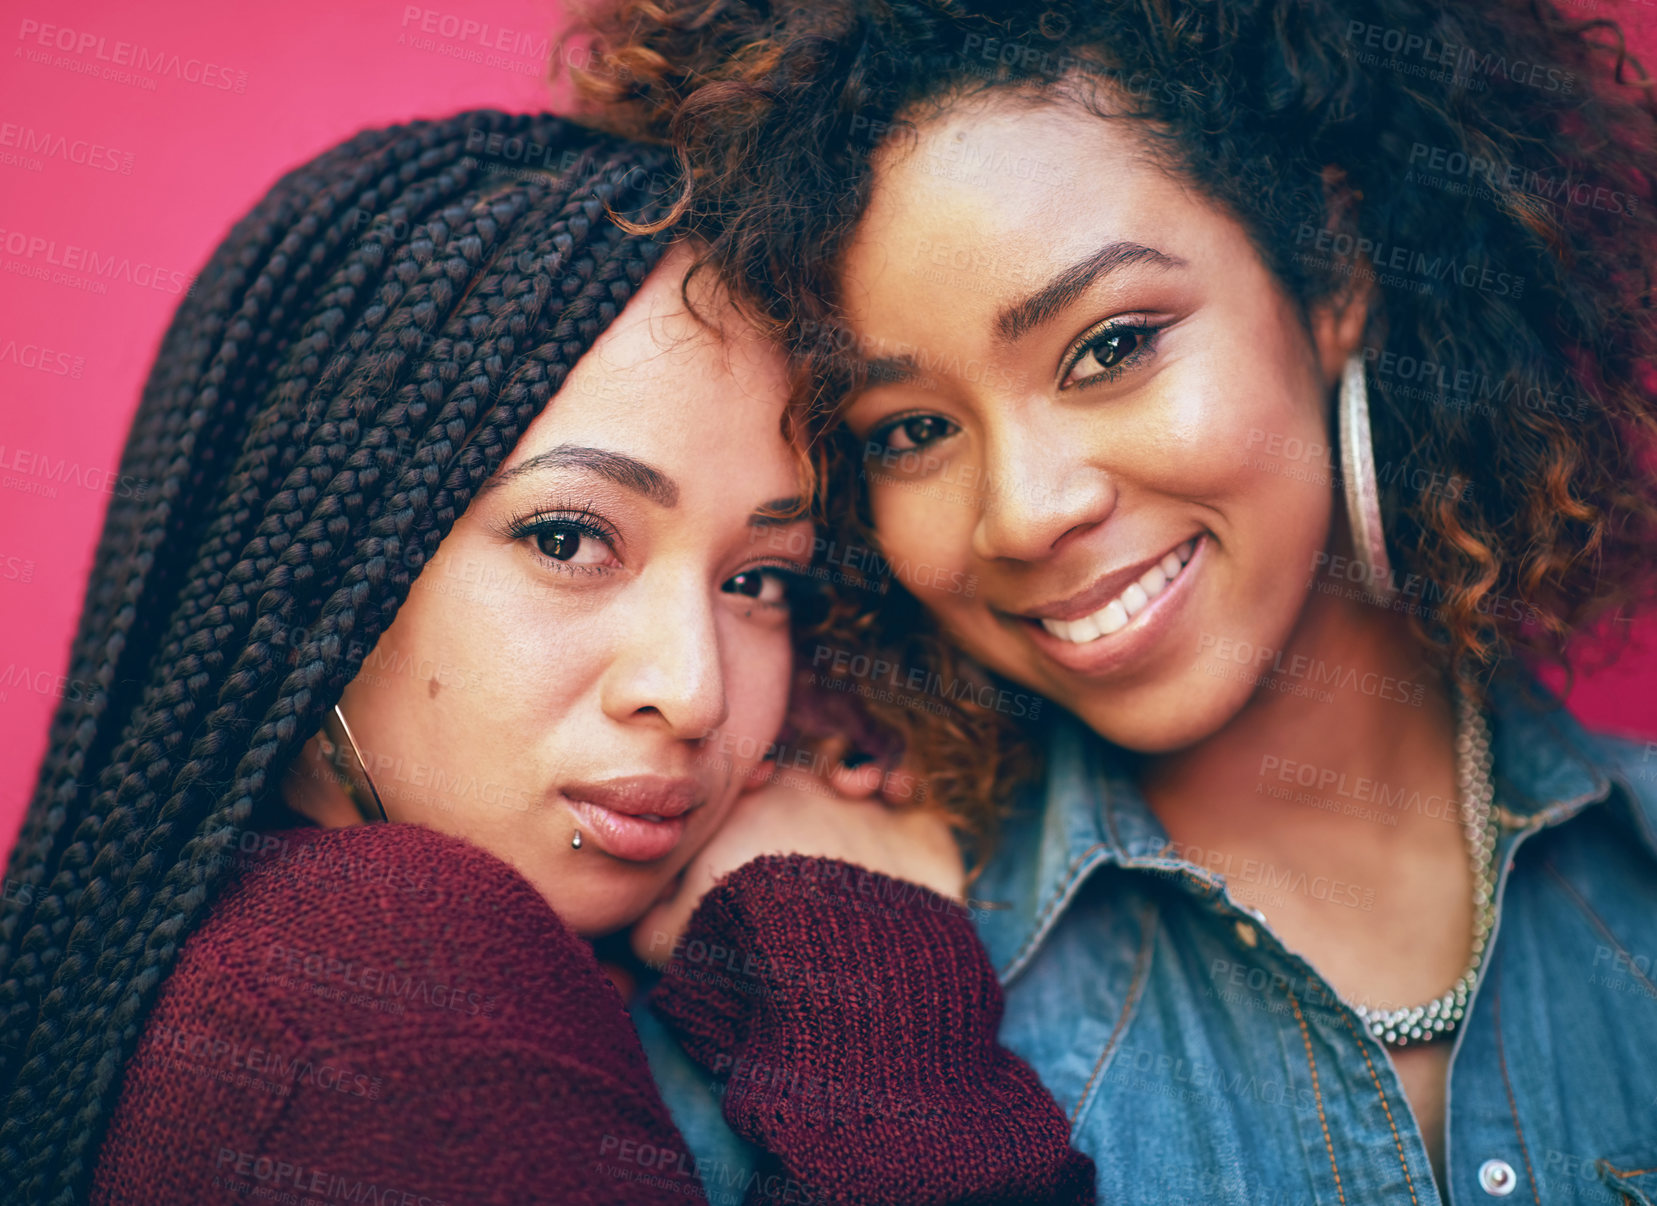 Buy stock photo Portrait of two girlfriends posing against a pink background